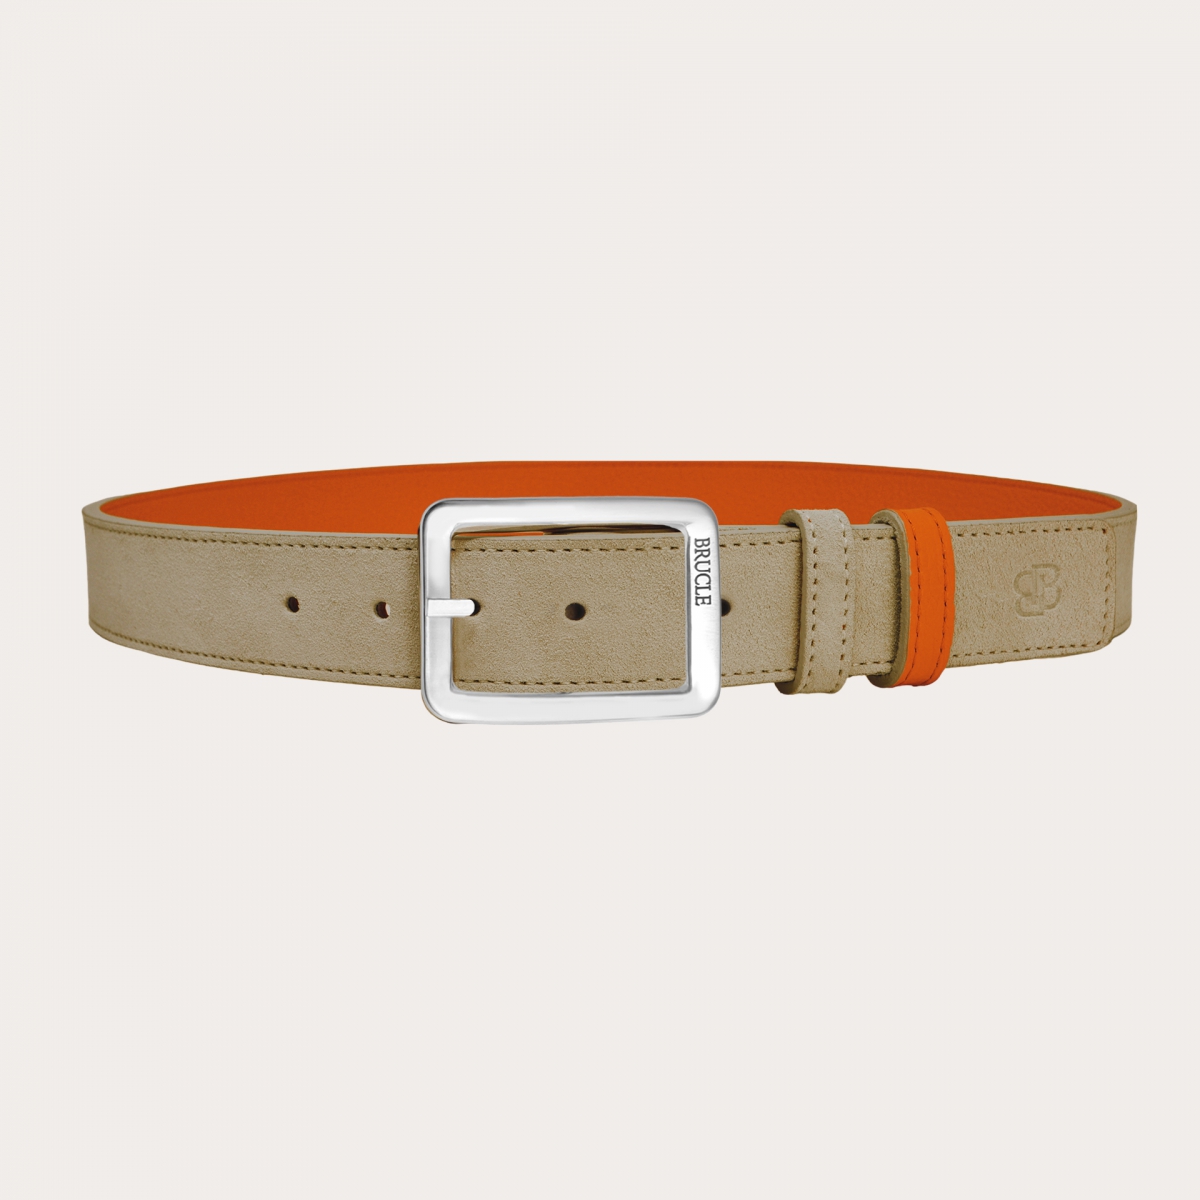 Reversible belt in beige suede and orange tumbled leather